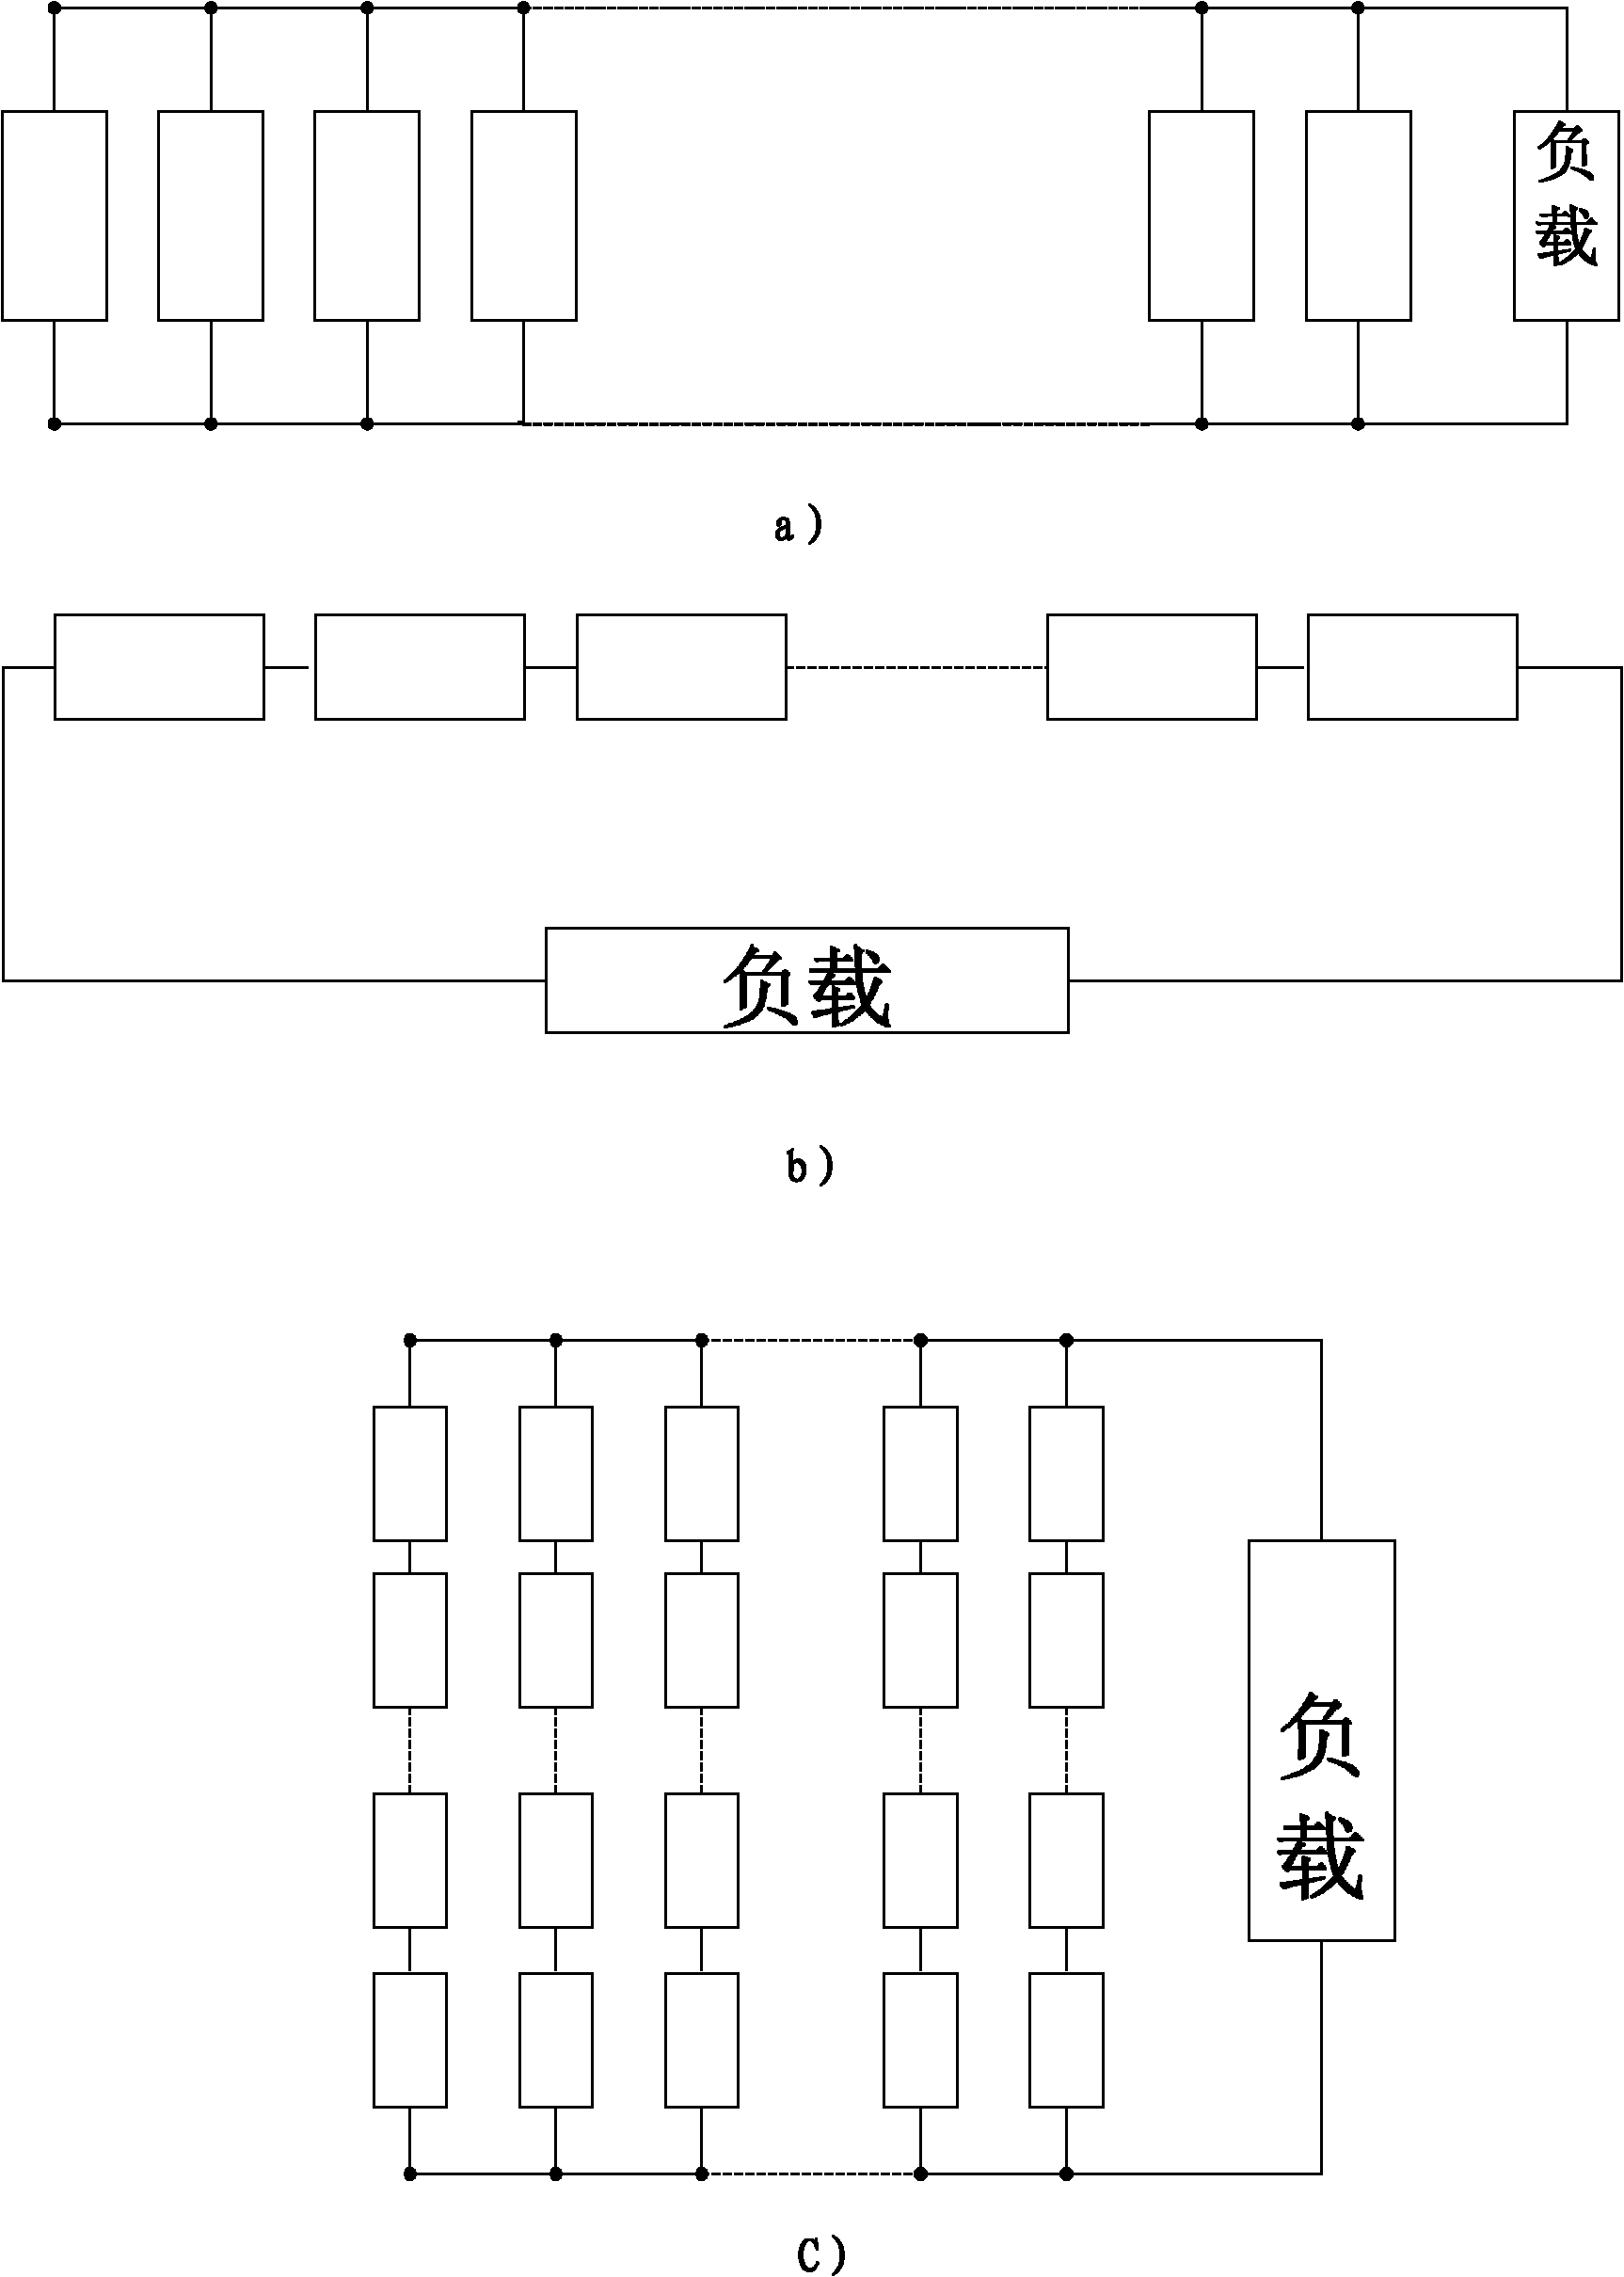 Fault diagnosis method of large-sized photovoltaic array